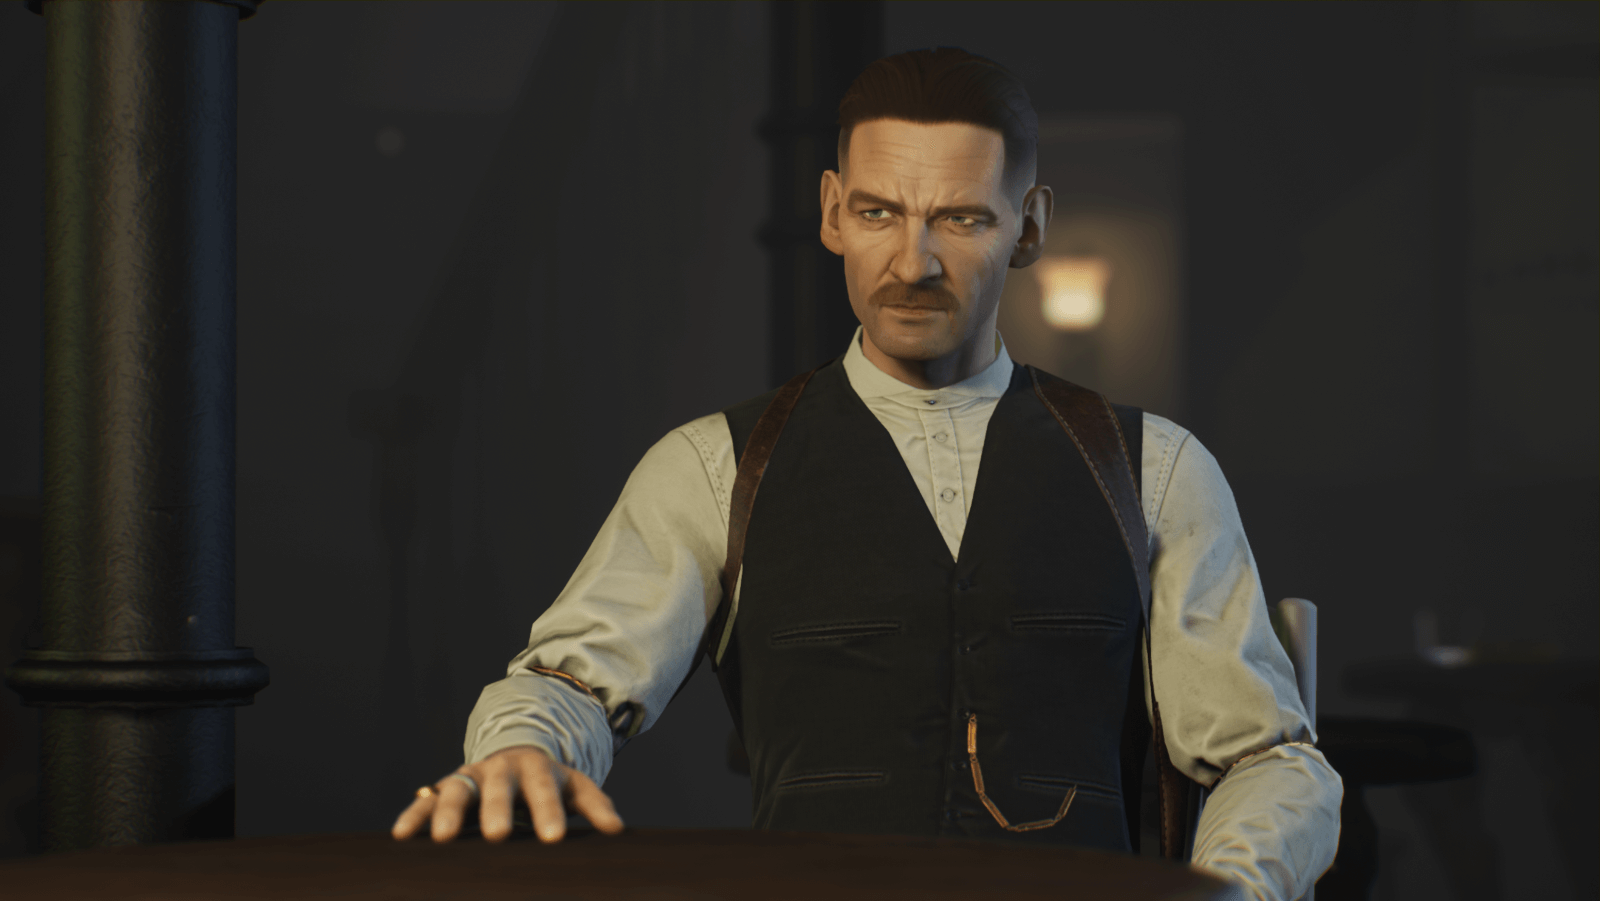 Peaky Blinders - The King's Ransom - Coming to VR in 2022